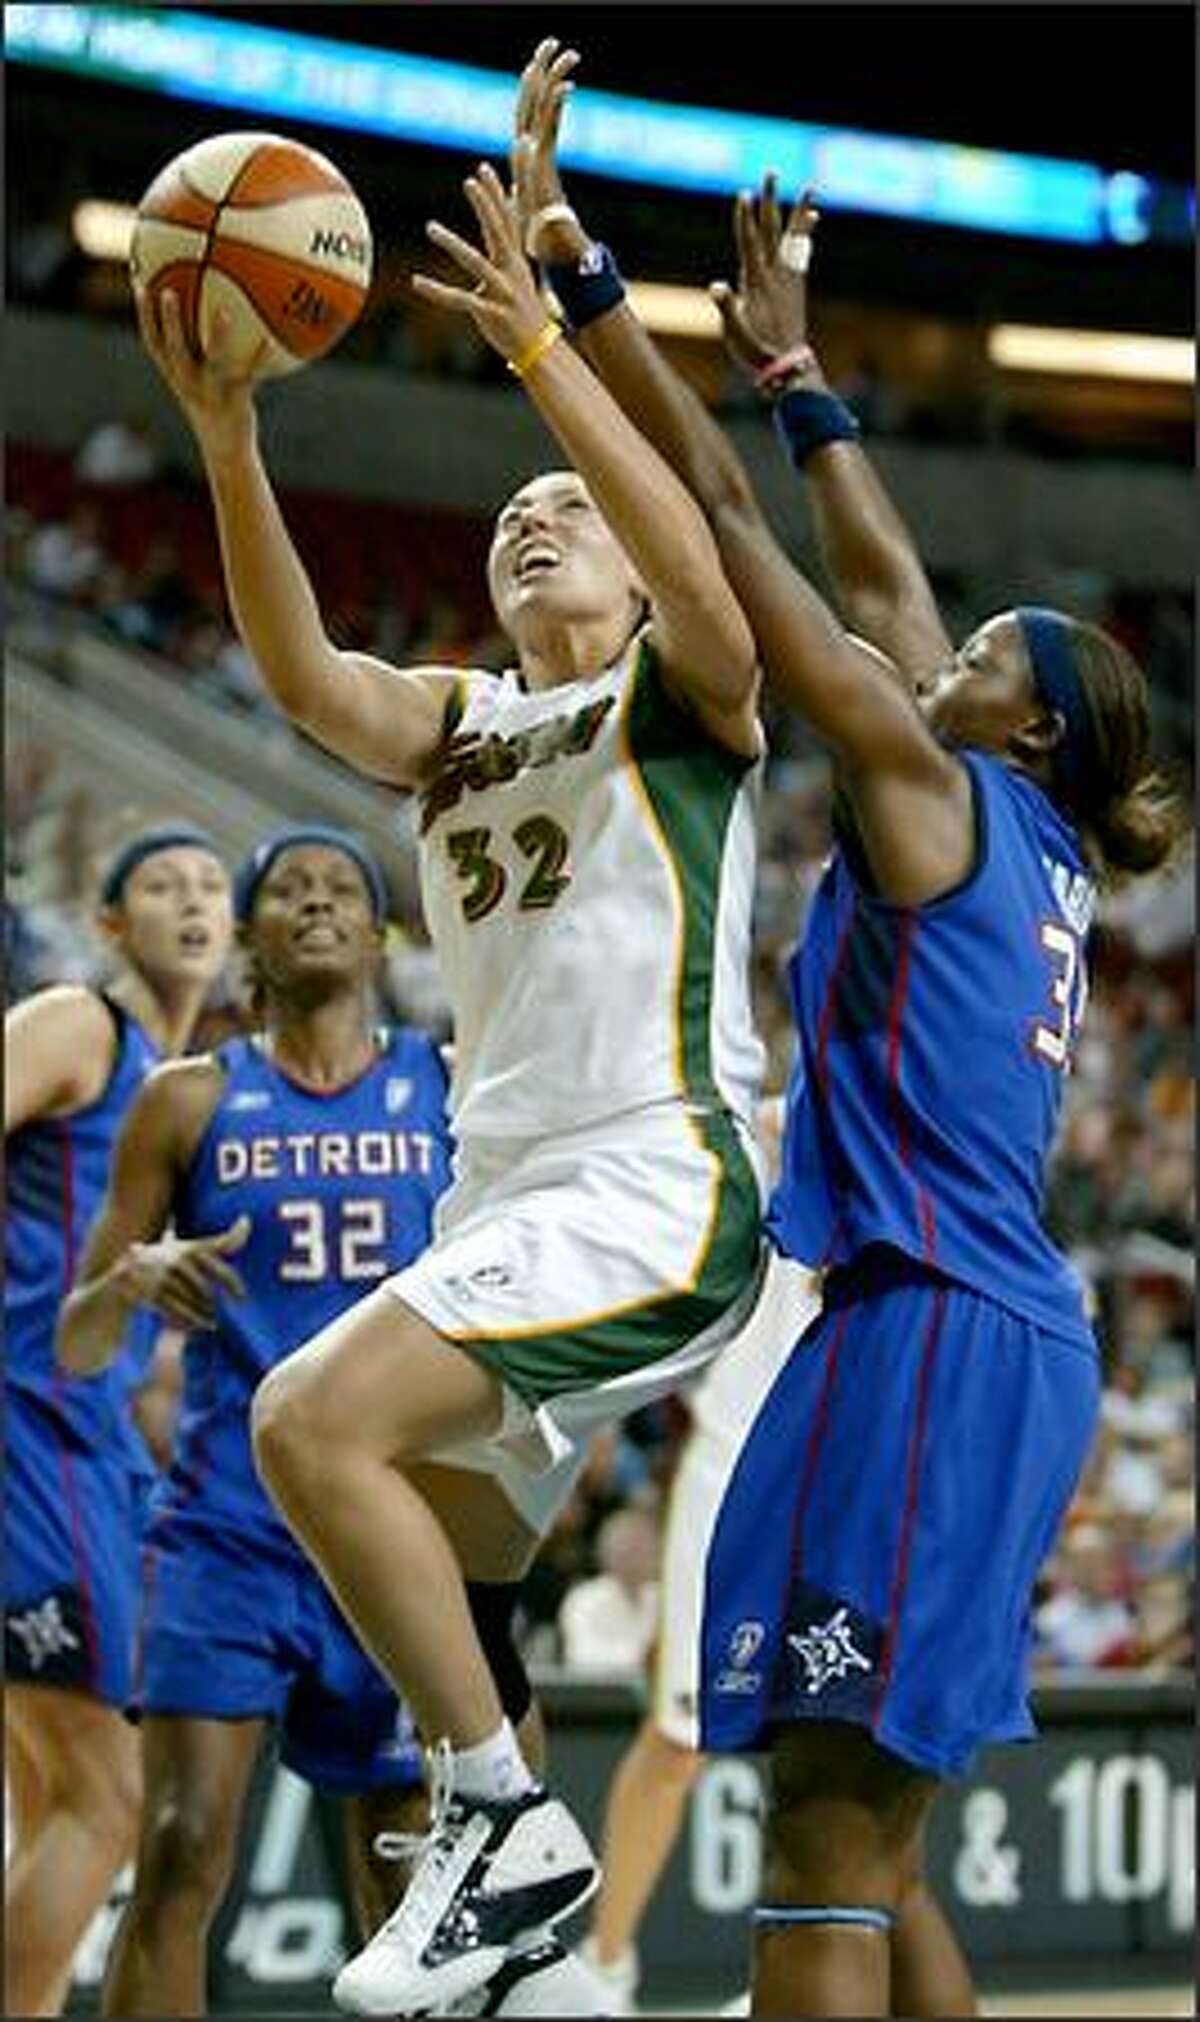 Seattle's Adia Barnes drives to the hoop as Detroit's Cheryl Ford tries for the block.